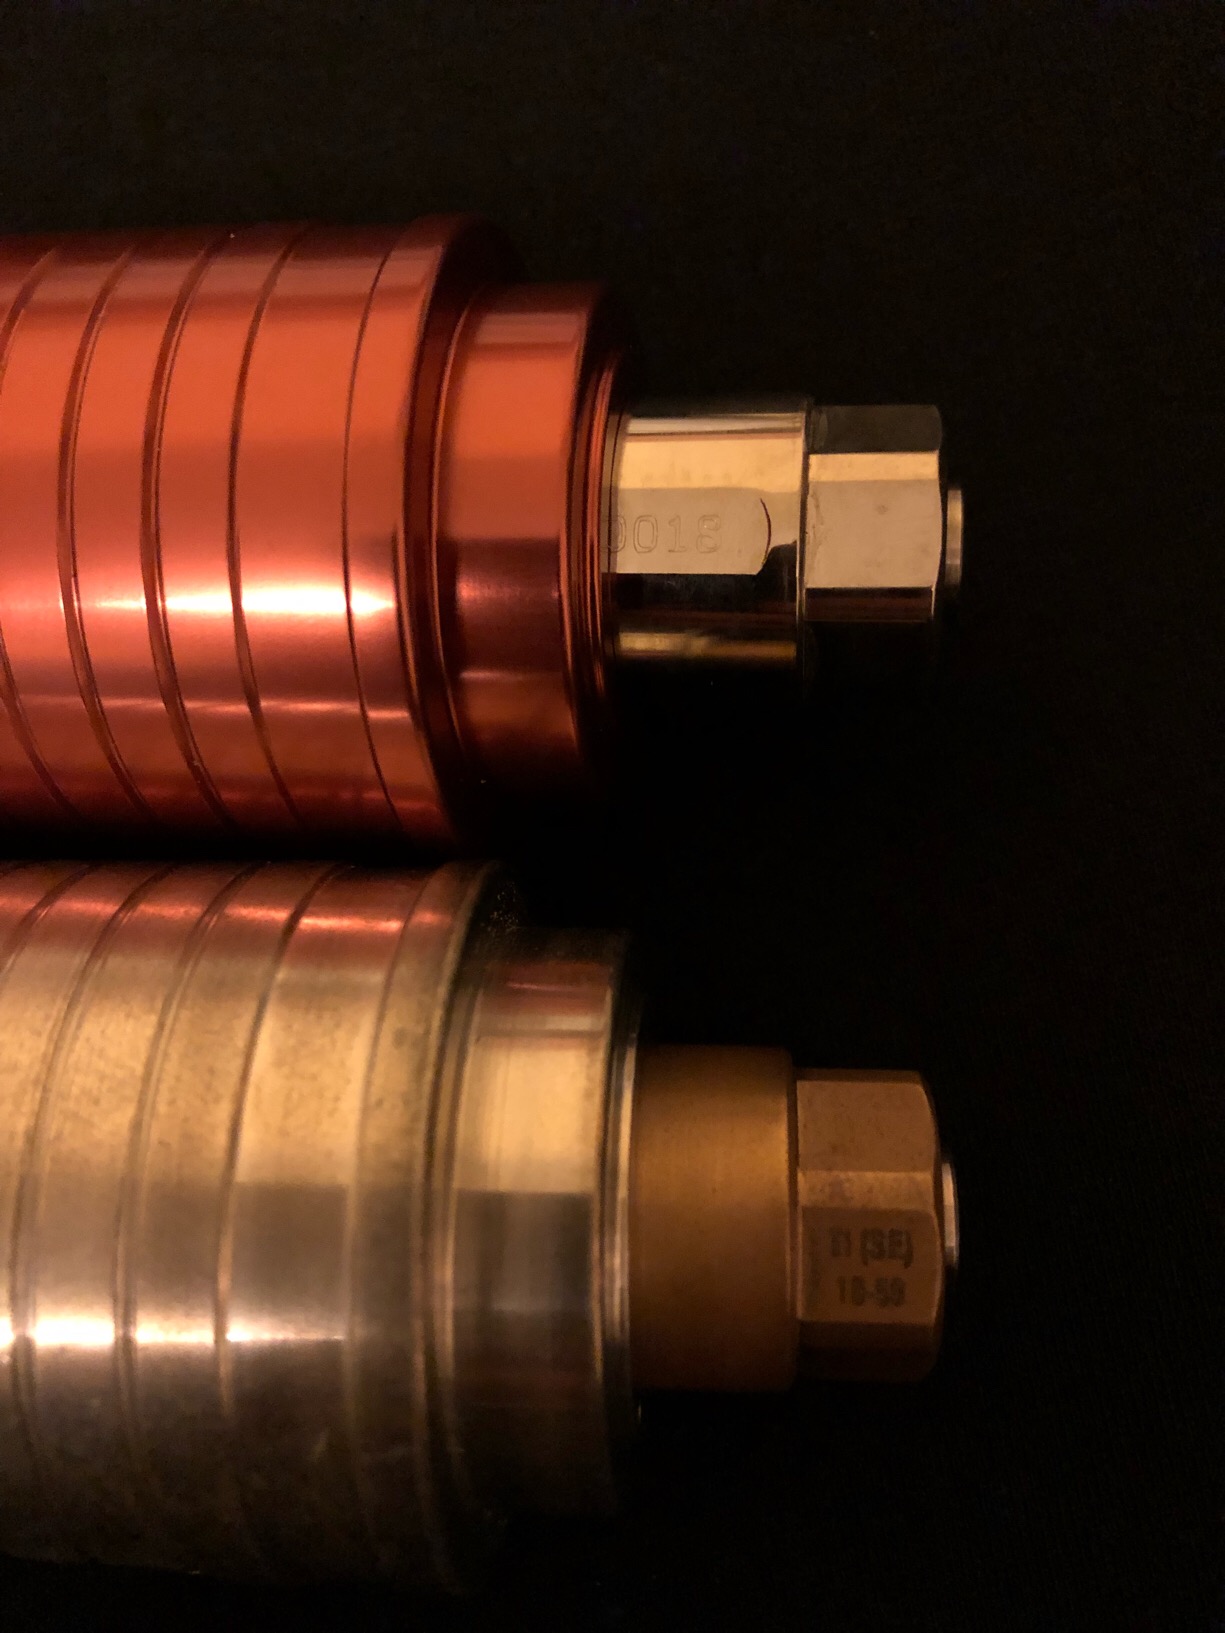 Here's my non-plated Titanium and my normal Copper